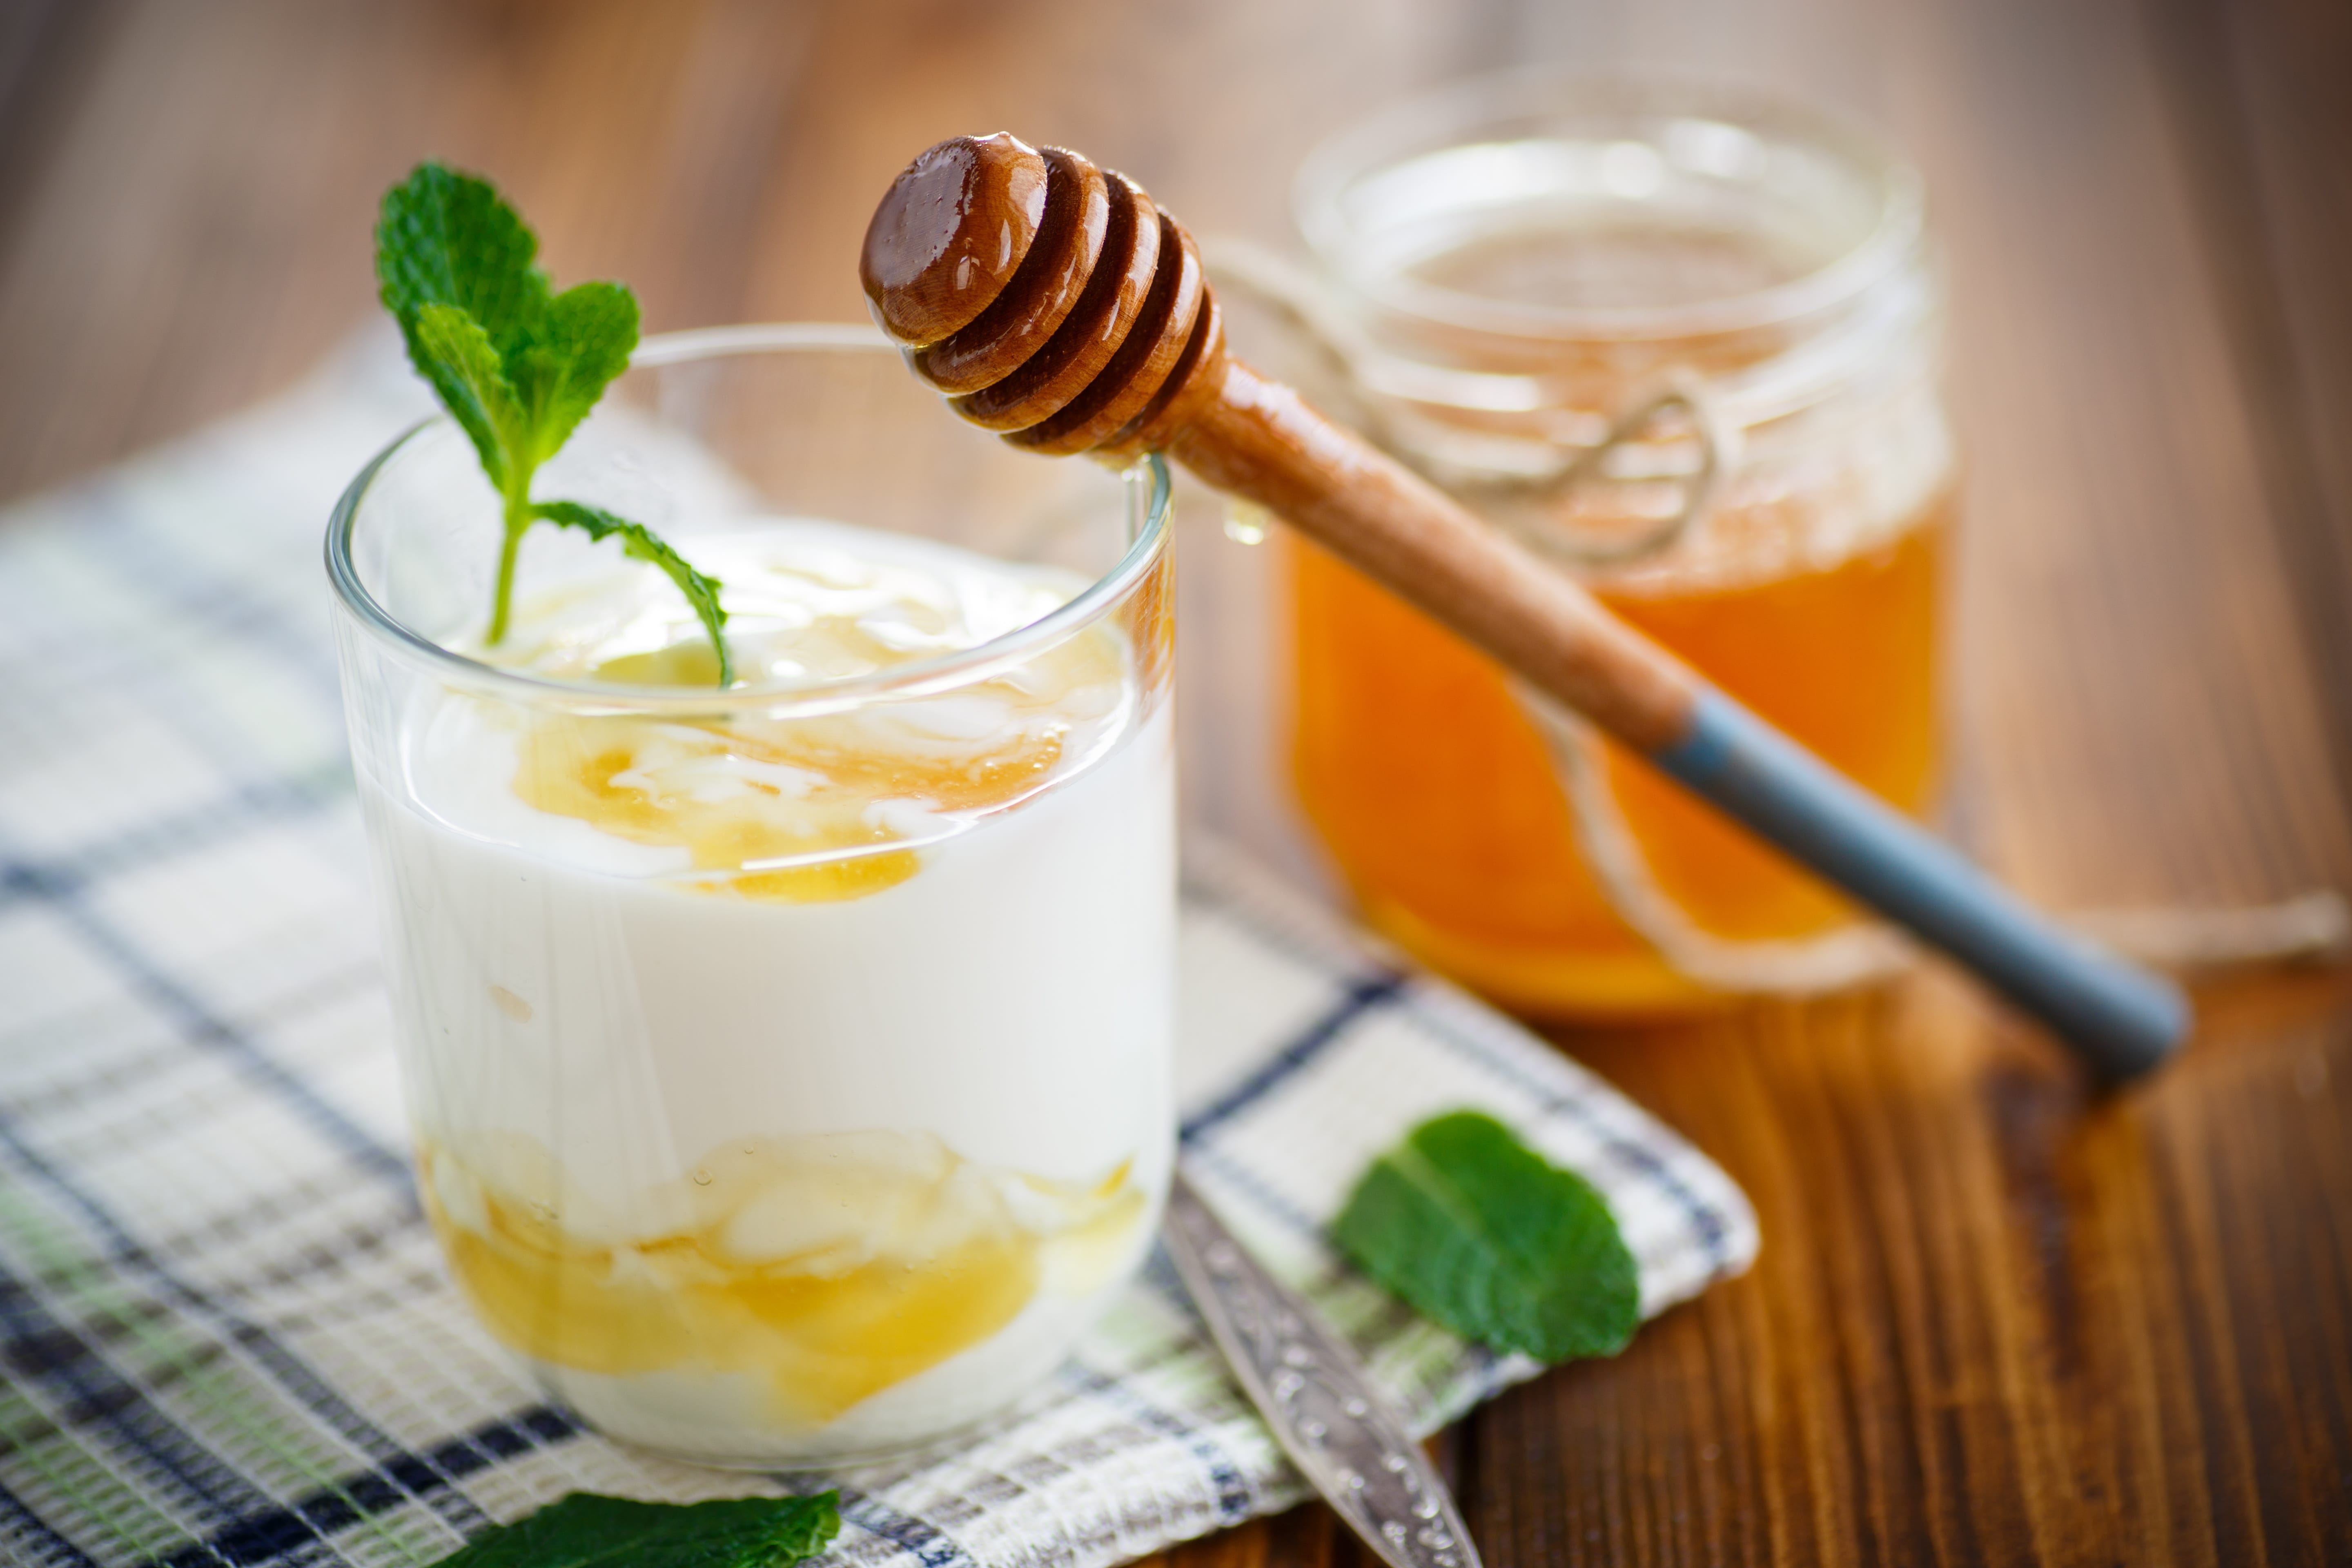 Yogurt and drizzle of honey in a glass with a sprig of mint. A wooden honey drizzler leans against the glass and a pot of honey is in the background.